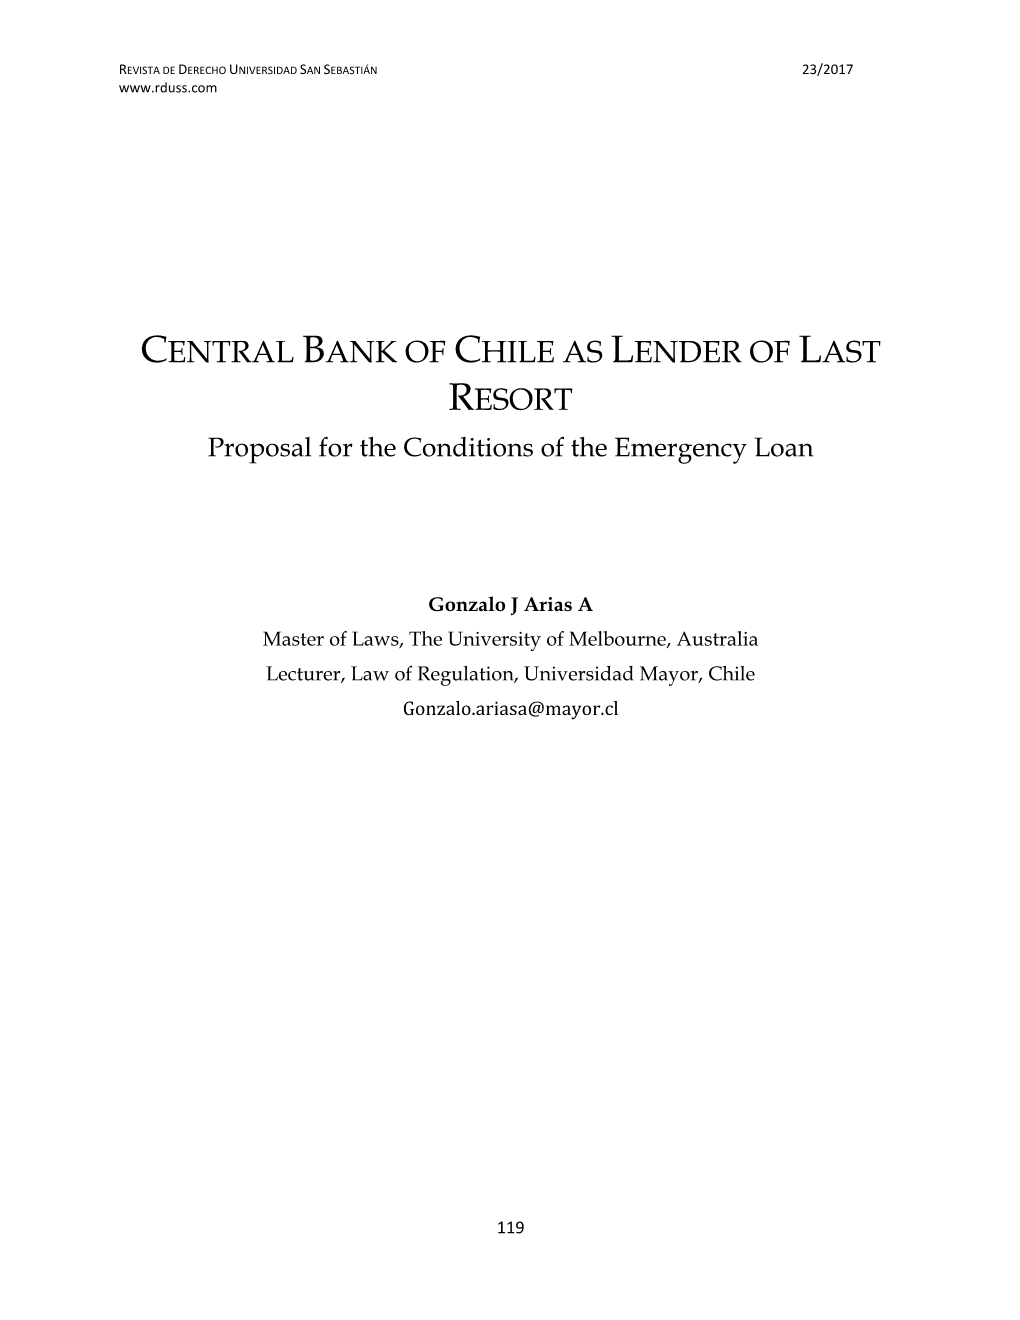 CENTRAL BANK of CHILE AS LENDER of LAST RESORT Proposal for the Conditions of the Emergency Loan